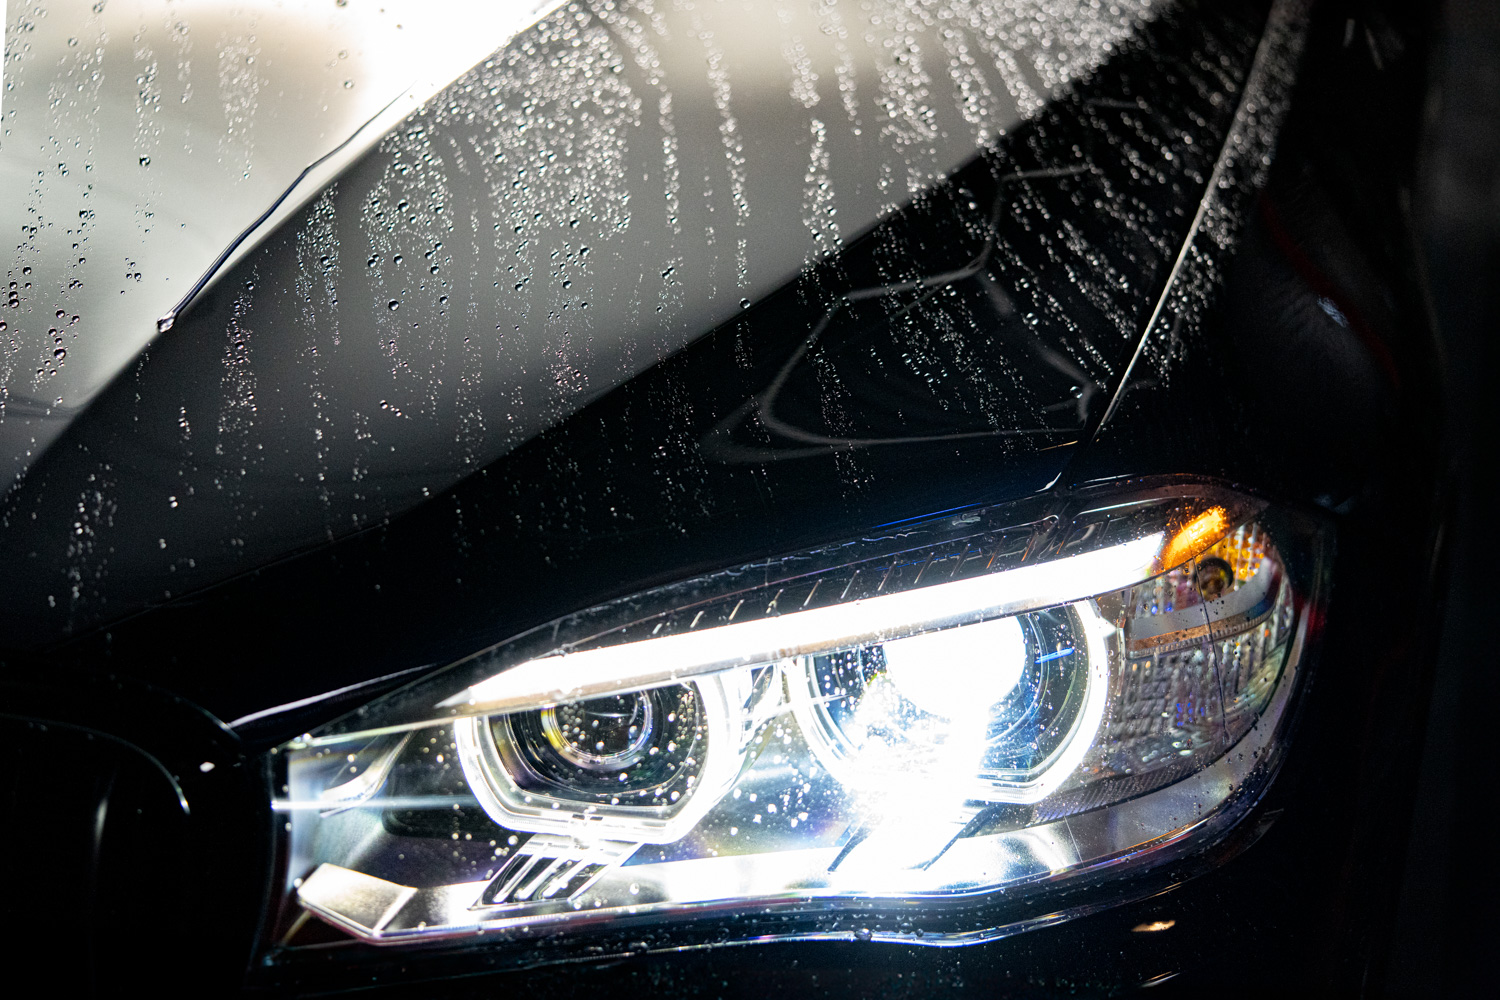 Ceramic coatings provide hydrophobic protection to a BMW